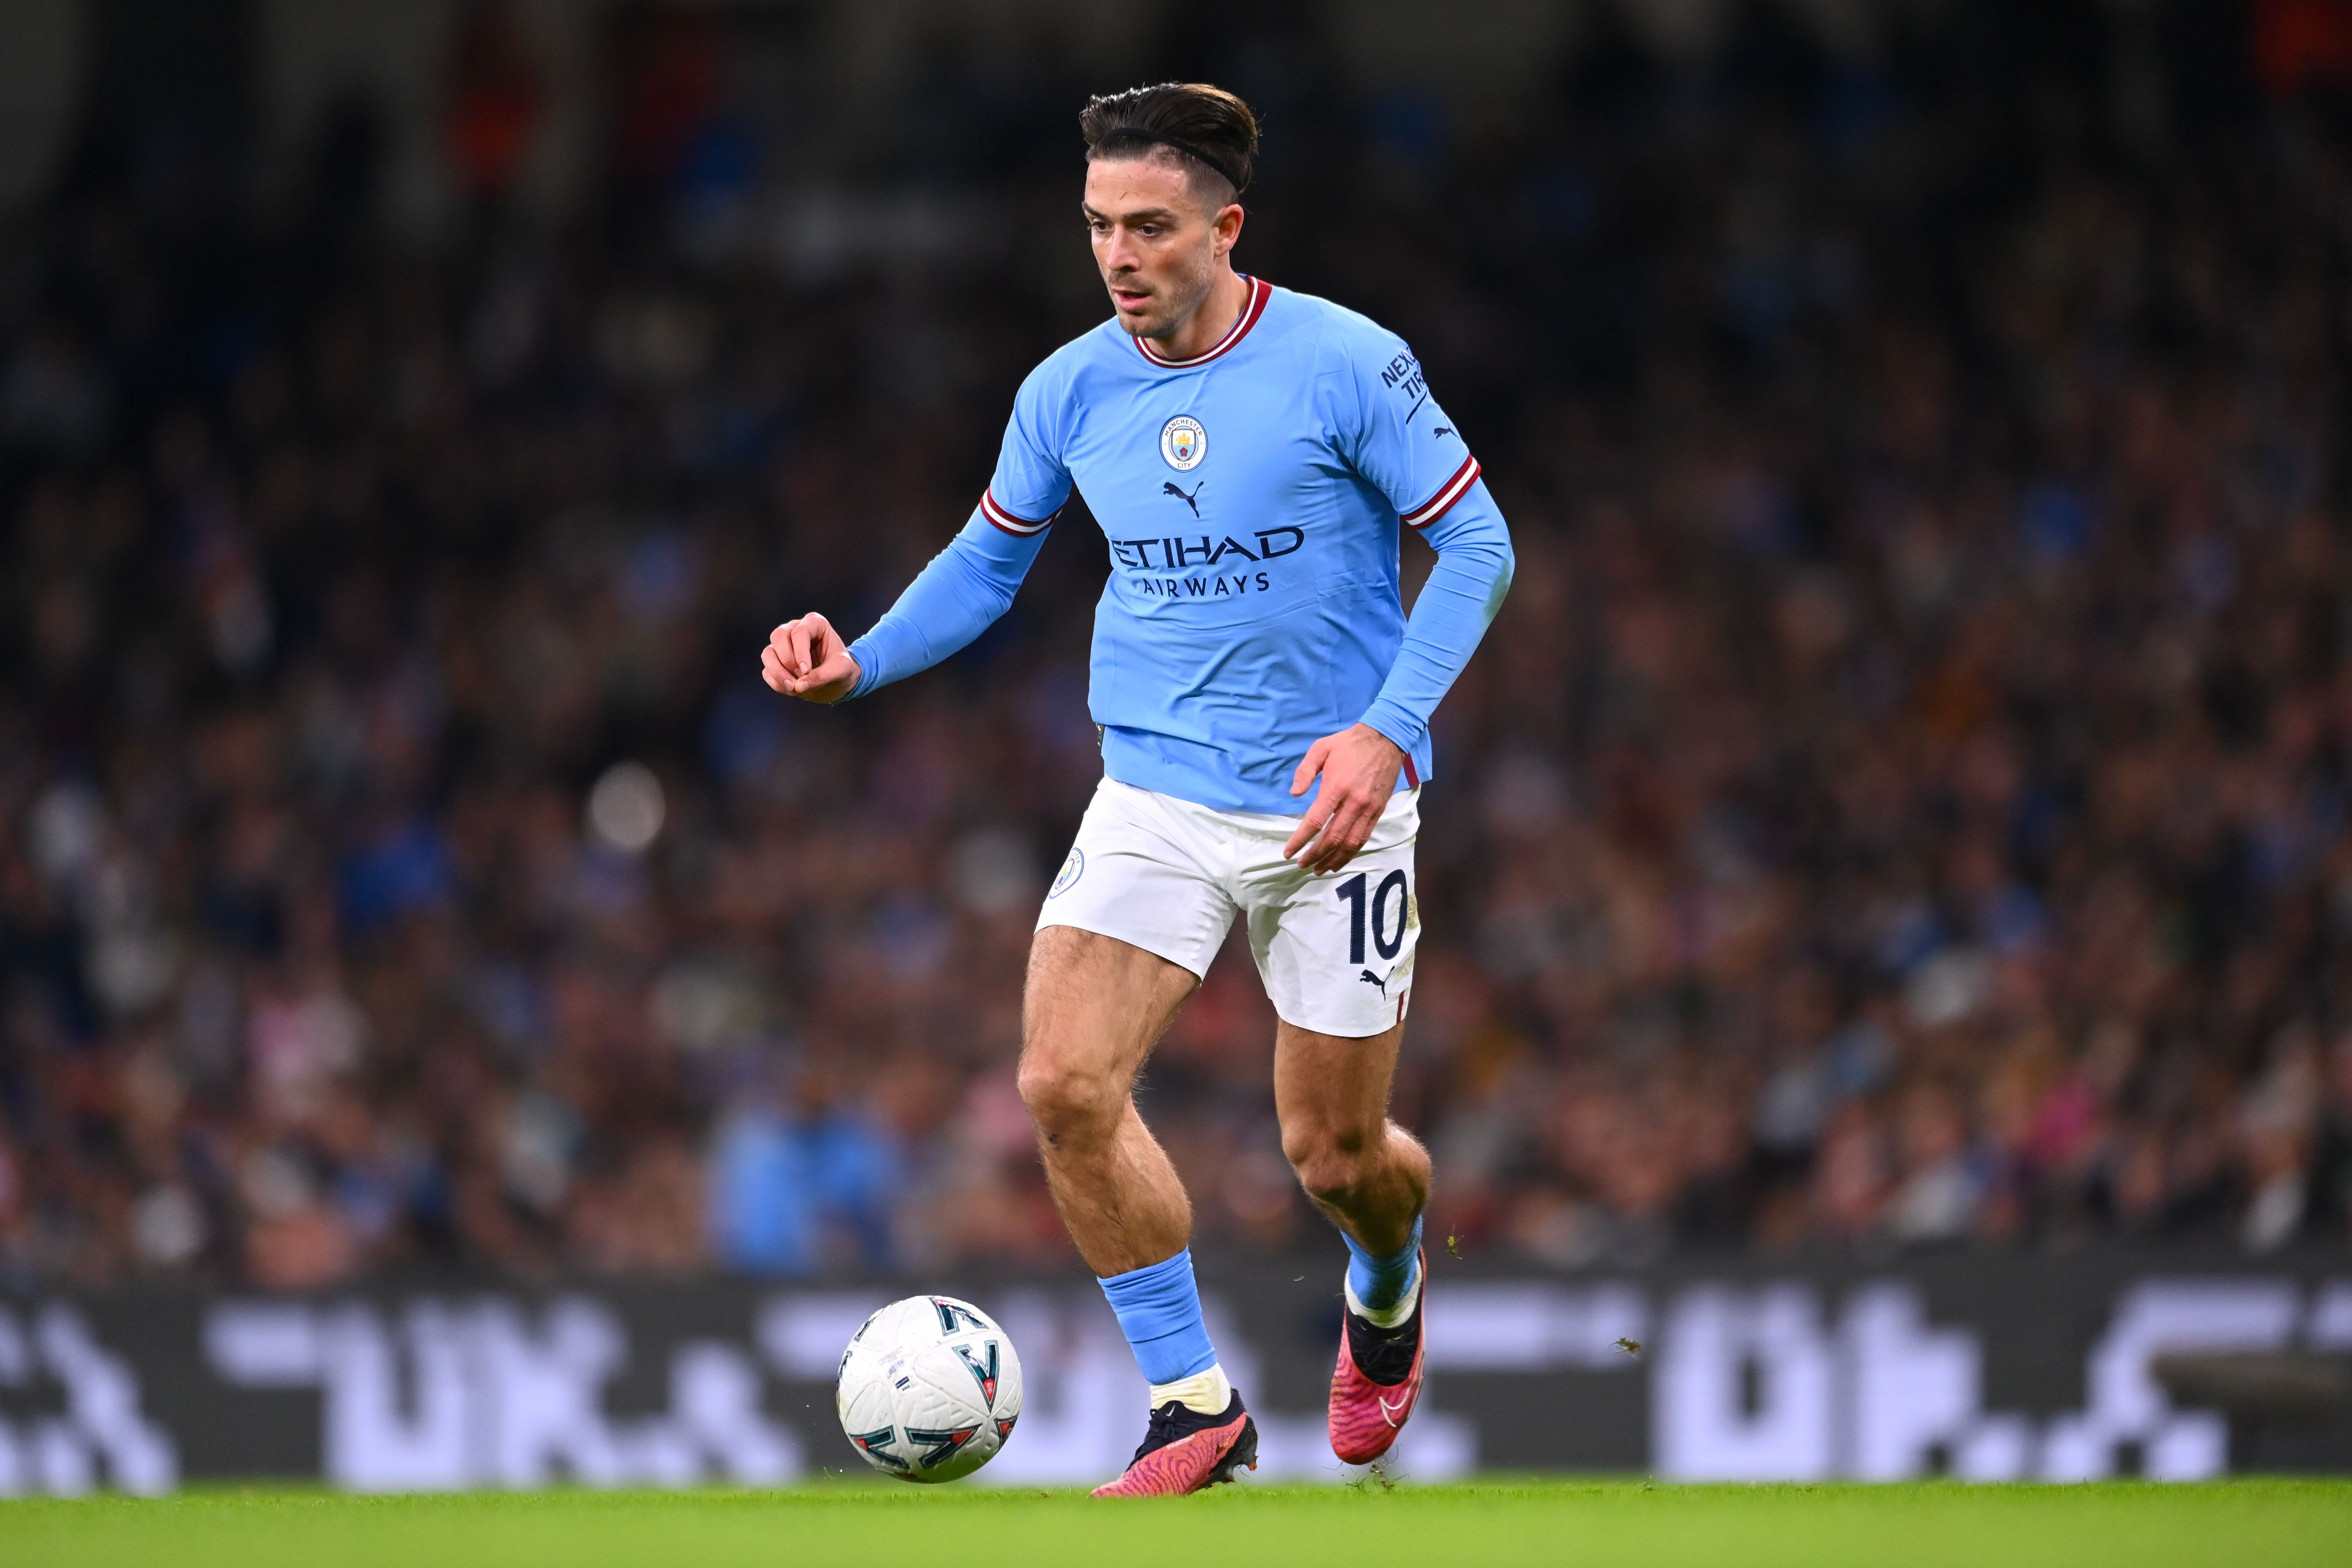 Jack Grealish of Manchester City in action during the Emirates FA Cup Fourth Round match at the Etihad Stadium on January 27, 2023 in Manchester, England